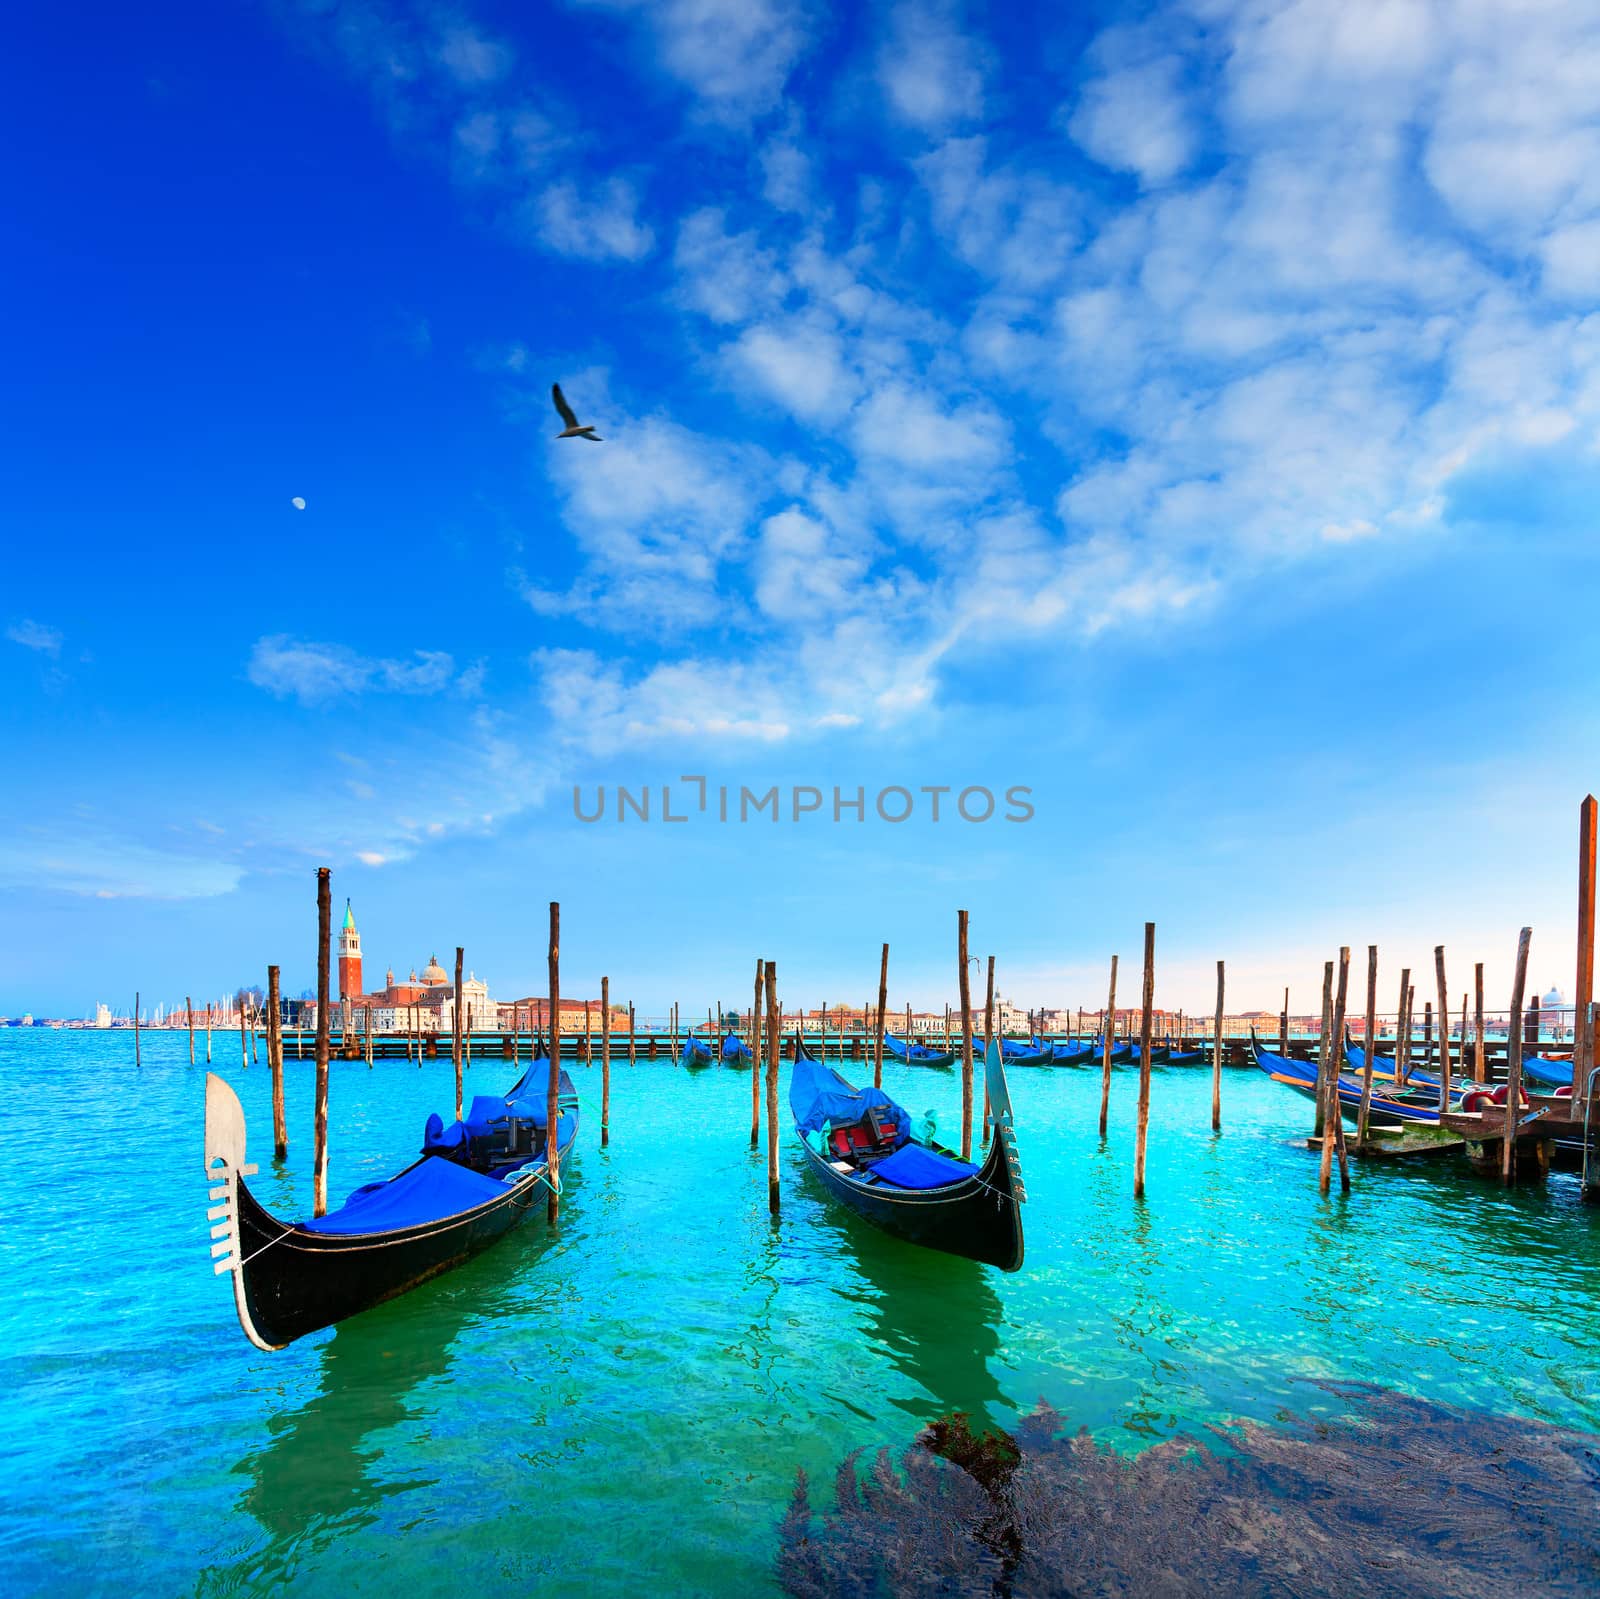  Venice. Gondolas. Canale della Giudecca. San Giorgio Maggiore. Venice is a city in northeast Italy which is renowned for the beauty of its setting, its architecture and its artworks. It is the capital of the Veneto region.